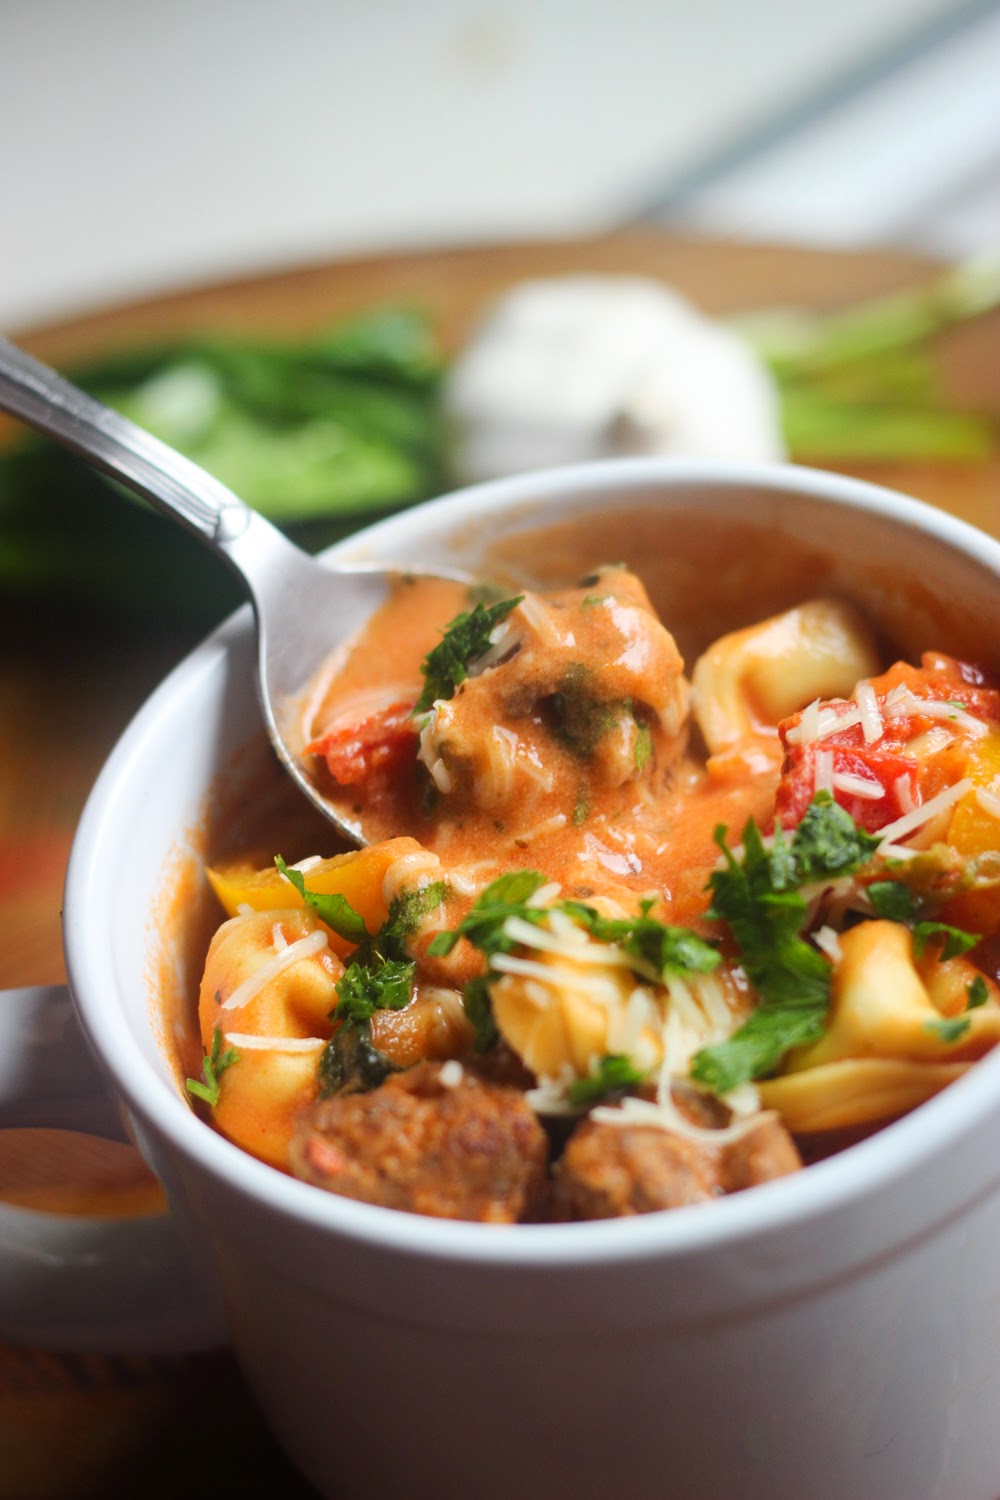 Diddles and Dumplings: Creamy Tomato, Sausage & Tortellini Soup